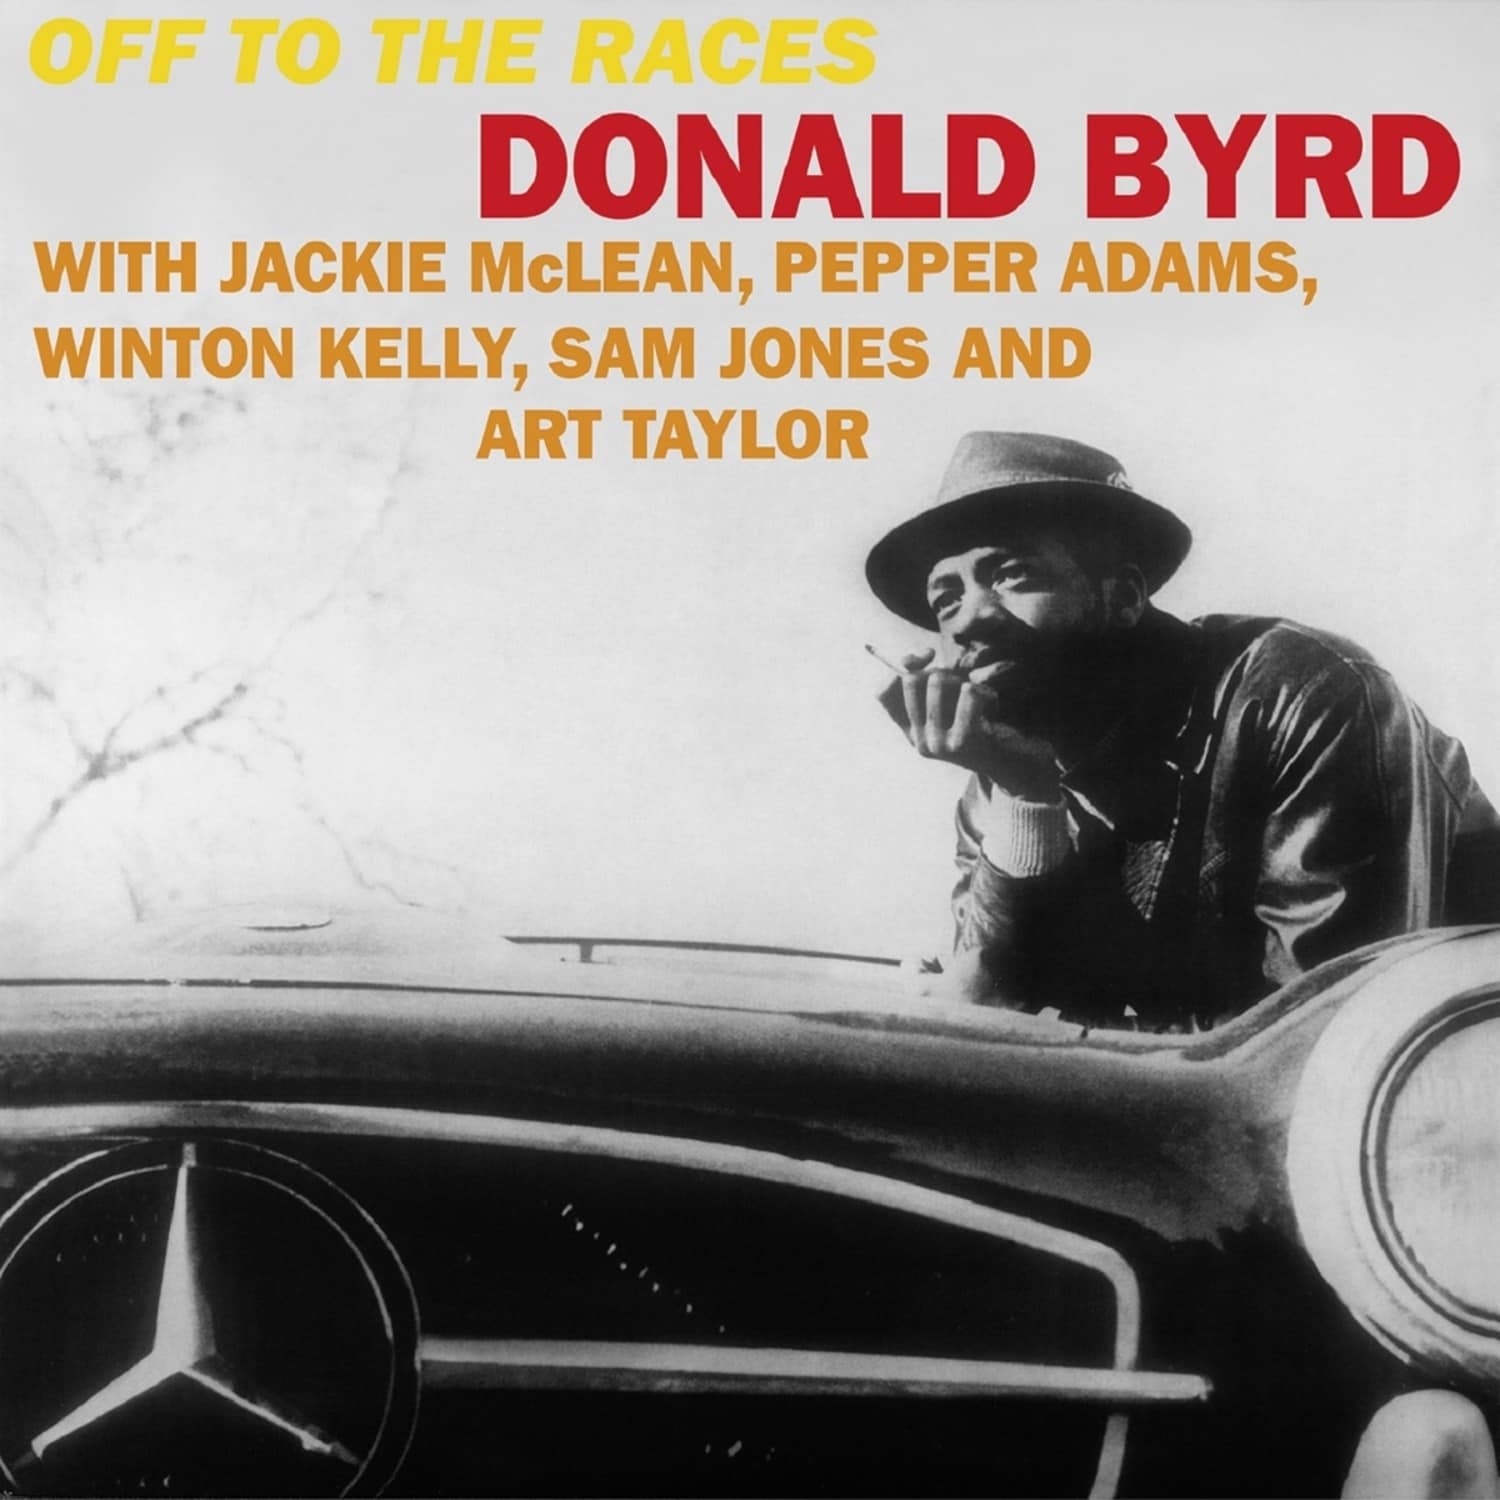 Donald Byrd - OFF TO THE RACES 